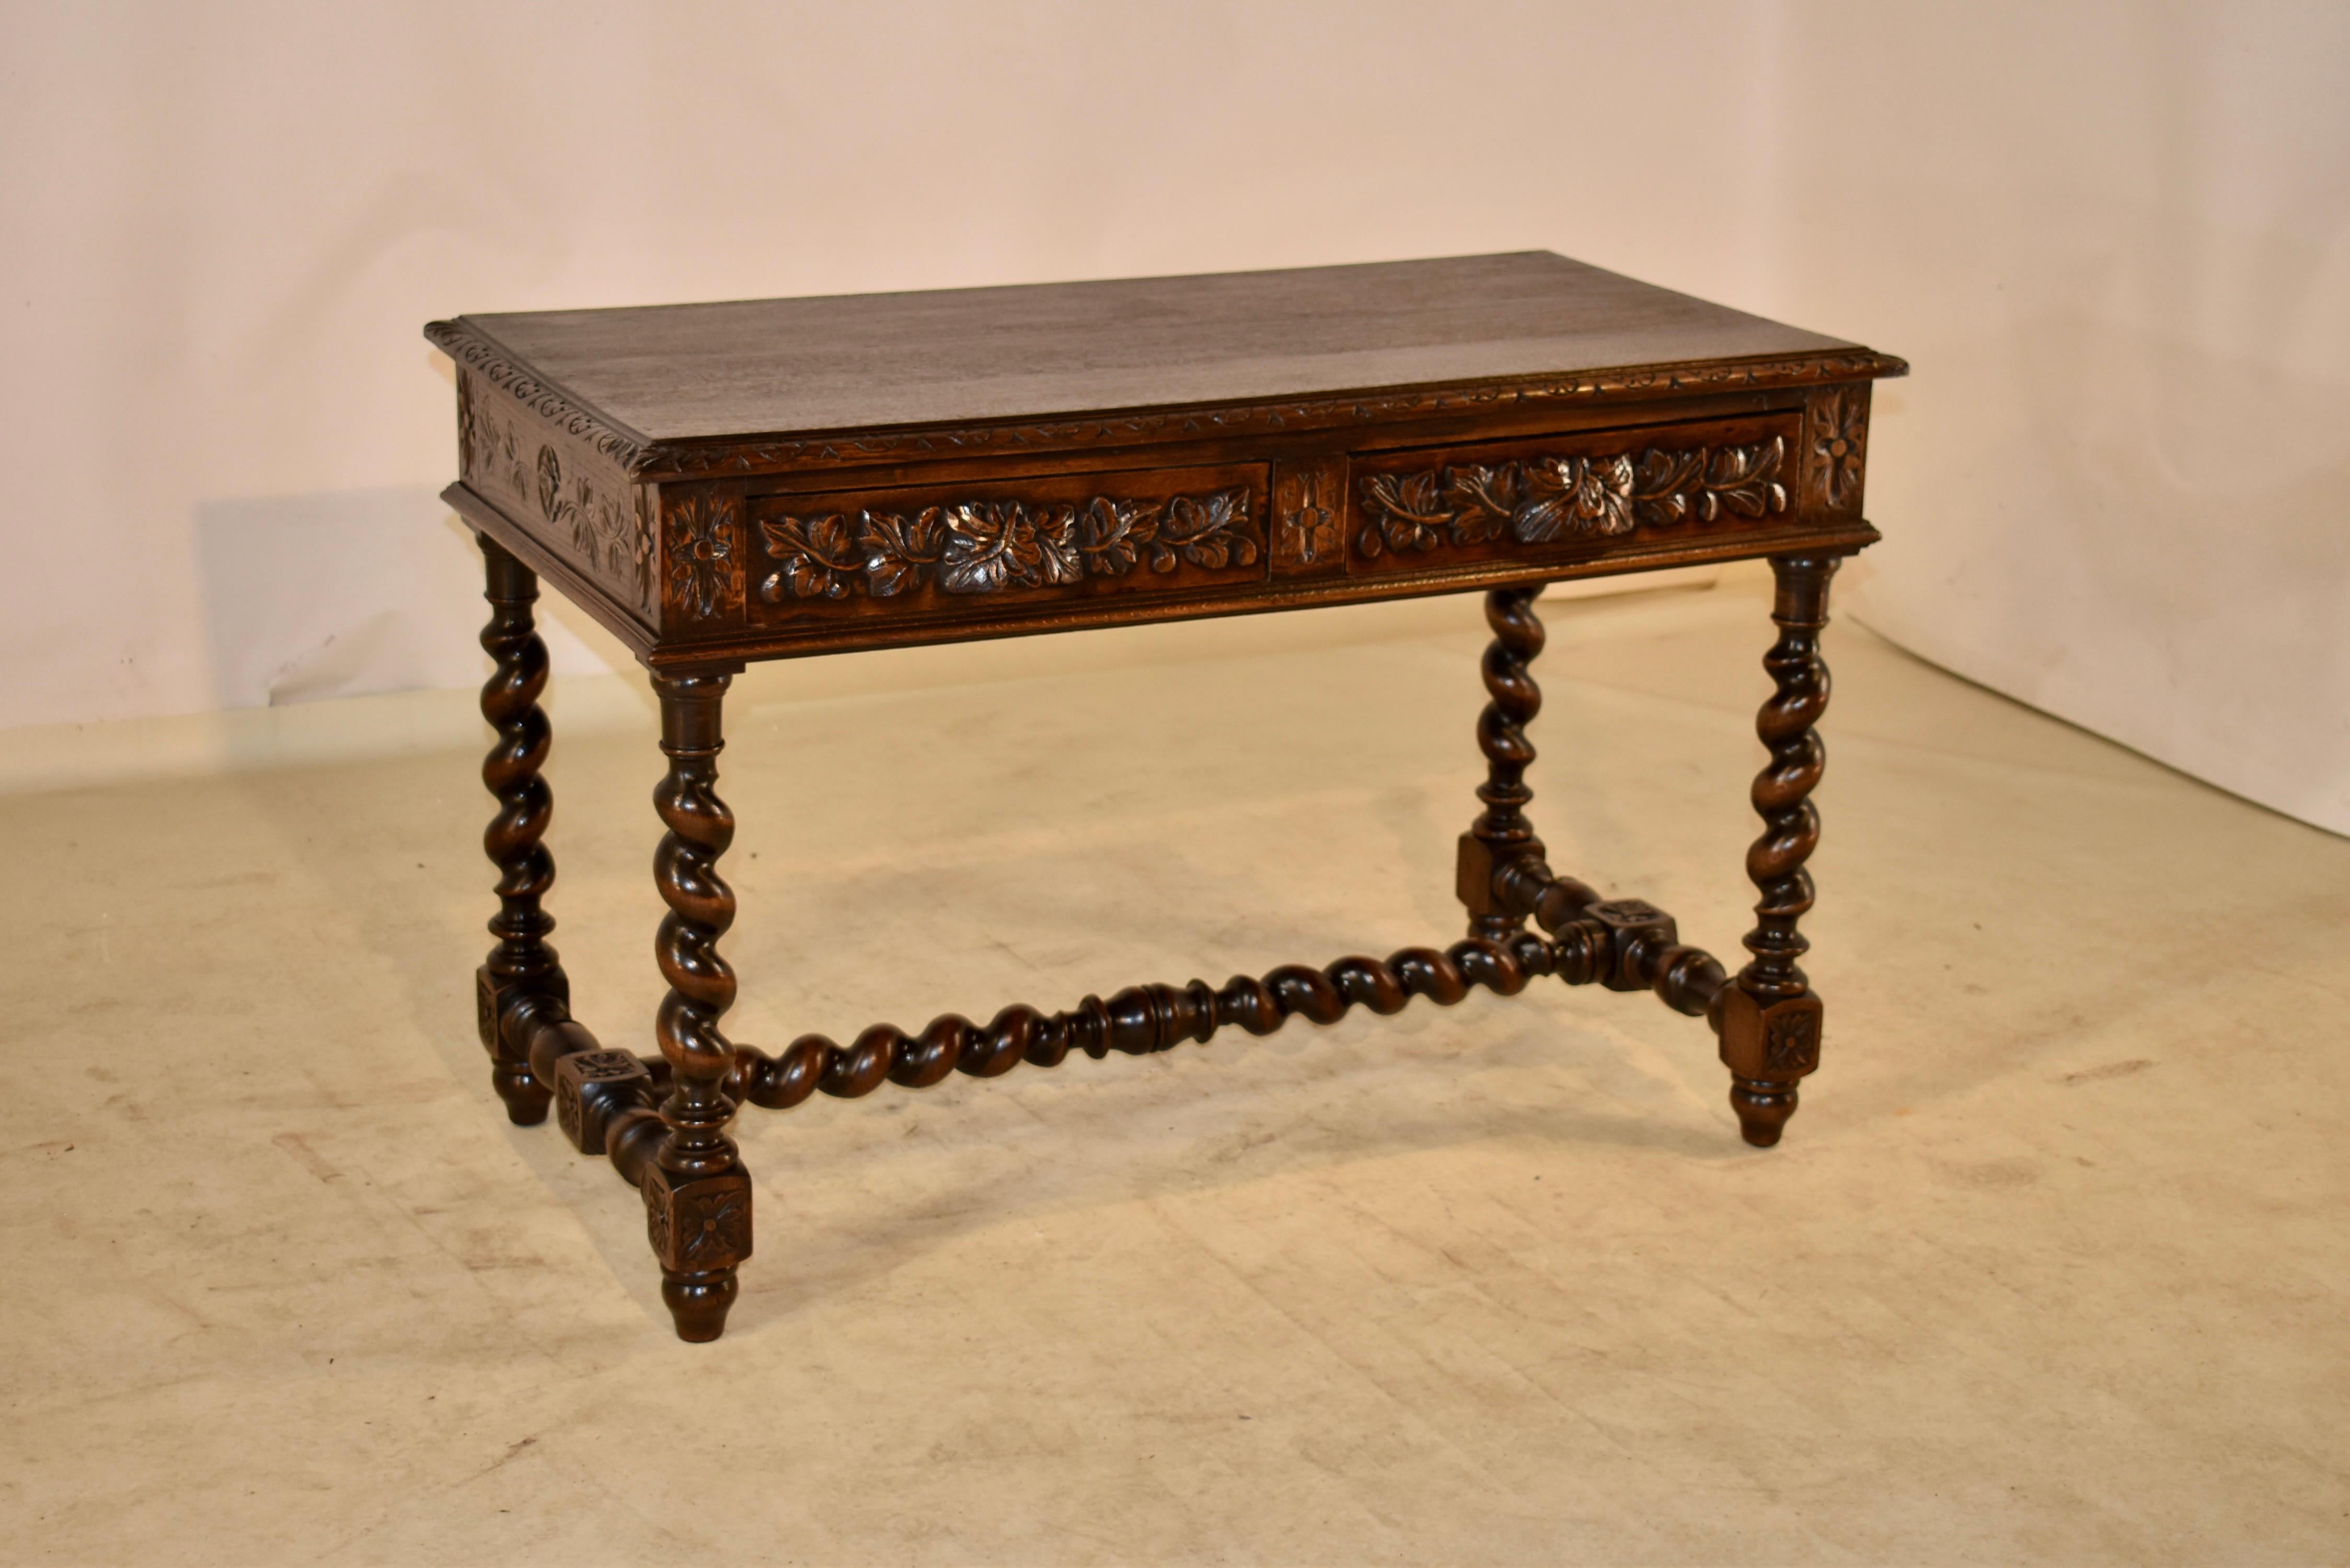 19th century oak library table from France. The top has a lovely hand beveled and carved decorated edge, and follows down to carved decorated sides and a finished back for easy placement in any room. The front contains two drawers, both with lovely